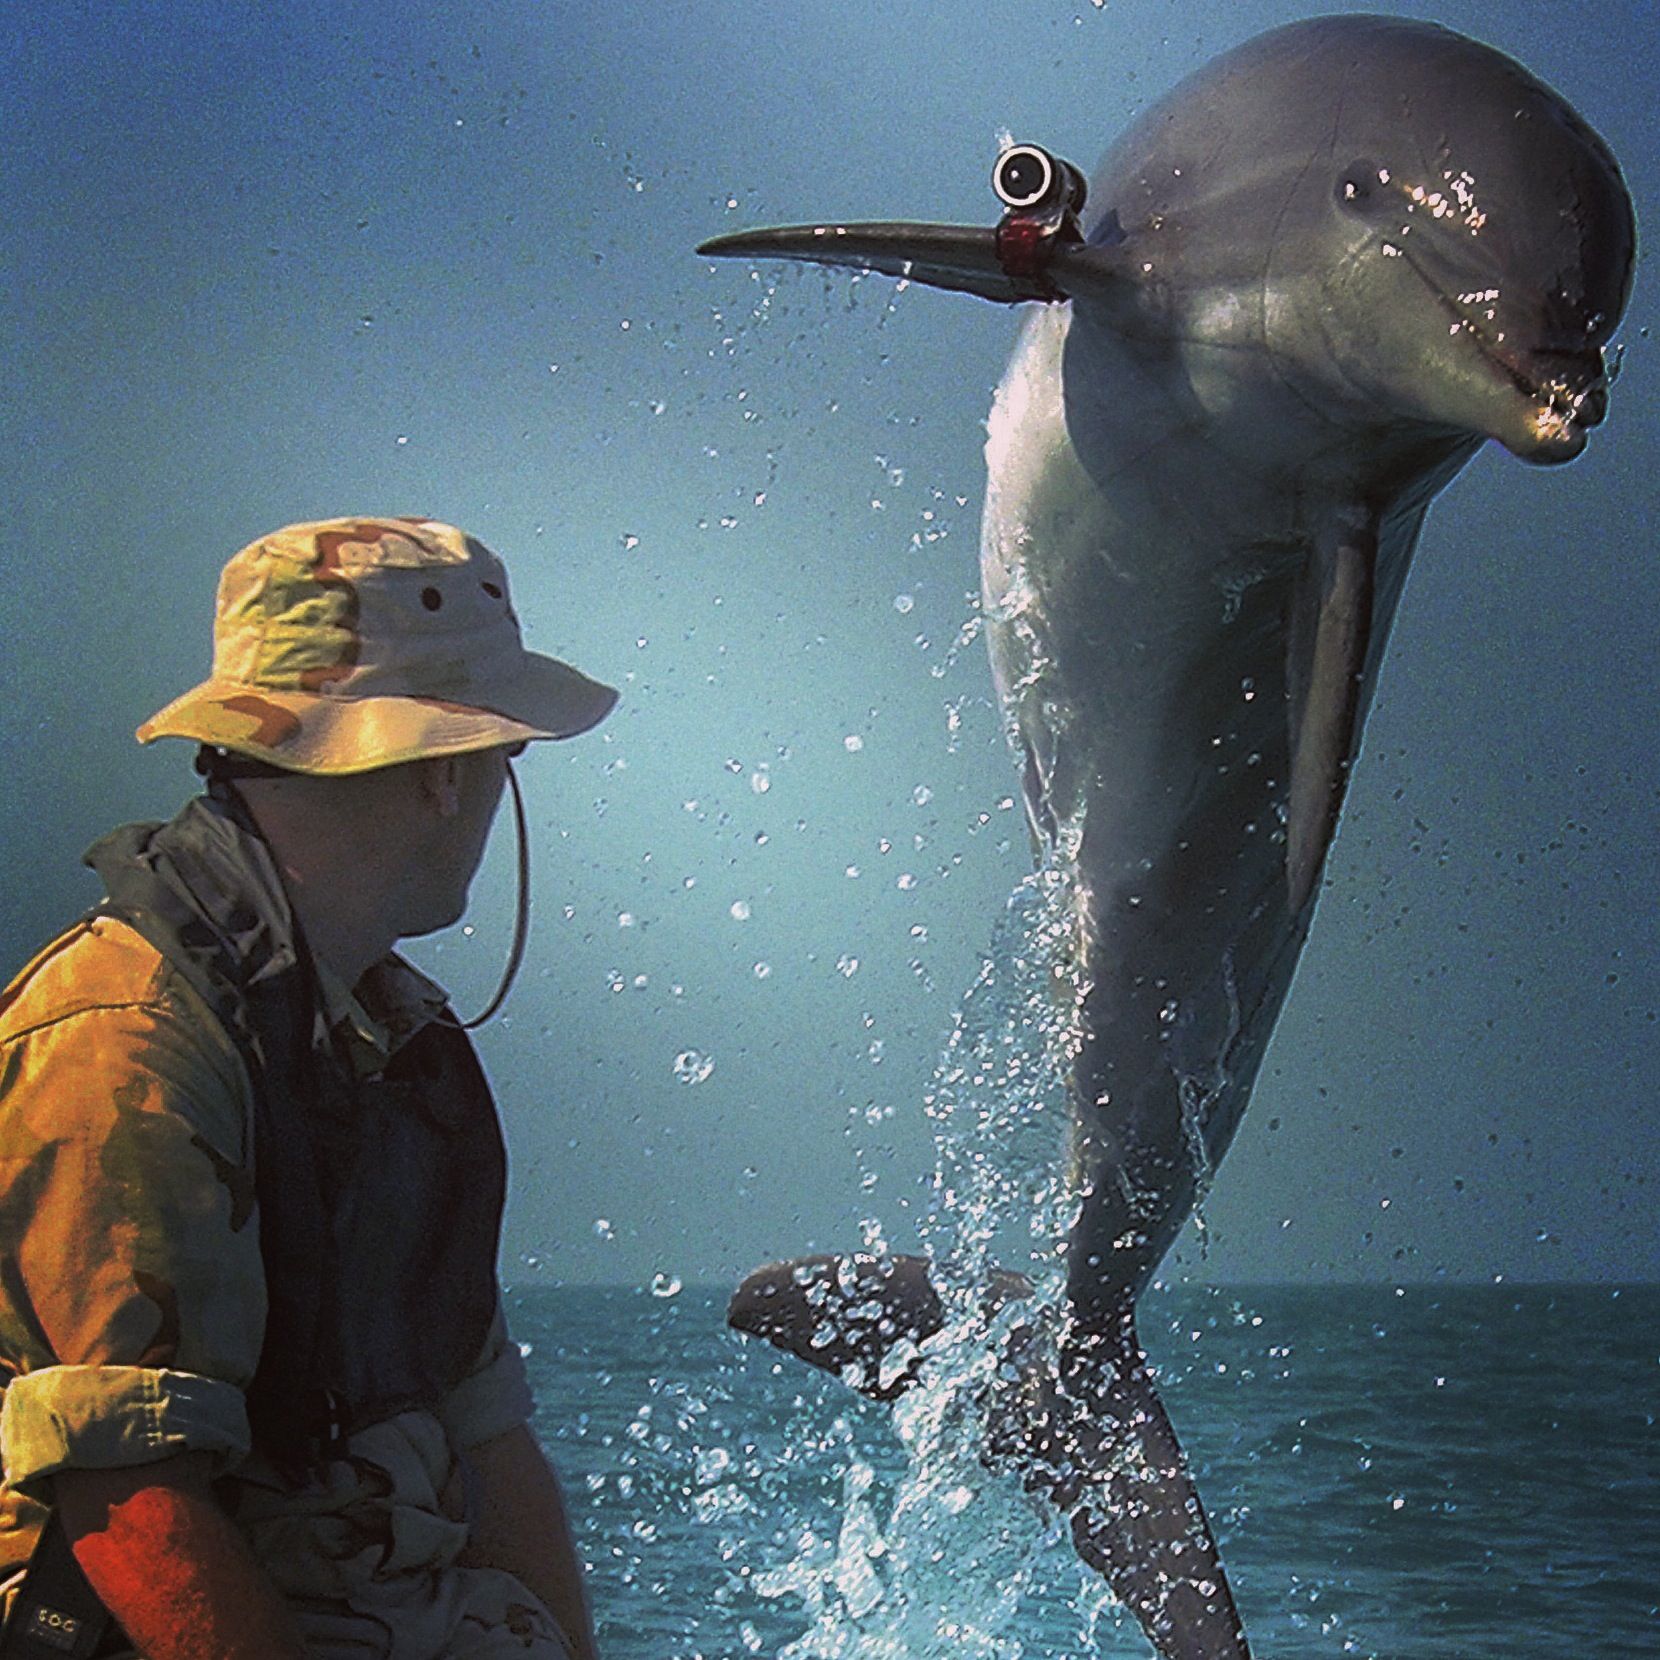 A dolphin with wearable computer? Here, US Navy K-Dog appears to be using a wearable computer to assist in mine clearing operations. Everything points to dolphins being the second most intelligent animals on the planet. ocean blue man sailor sea water sky dolphin wearable computer mammal US Navy leaping dolphin camera mine-clearing animal Photo: Wikimedia/US navy/Public Domain